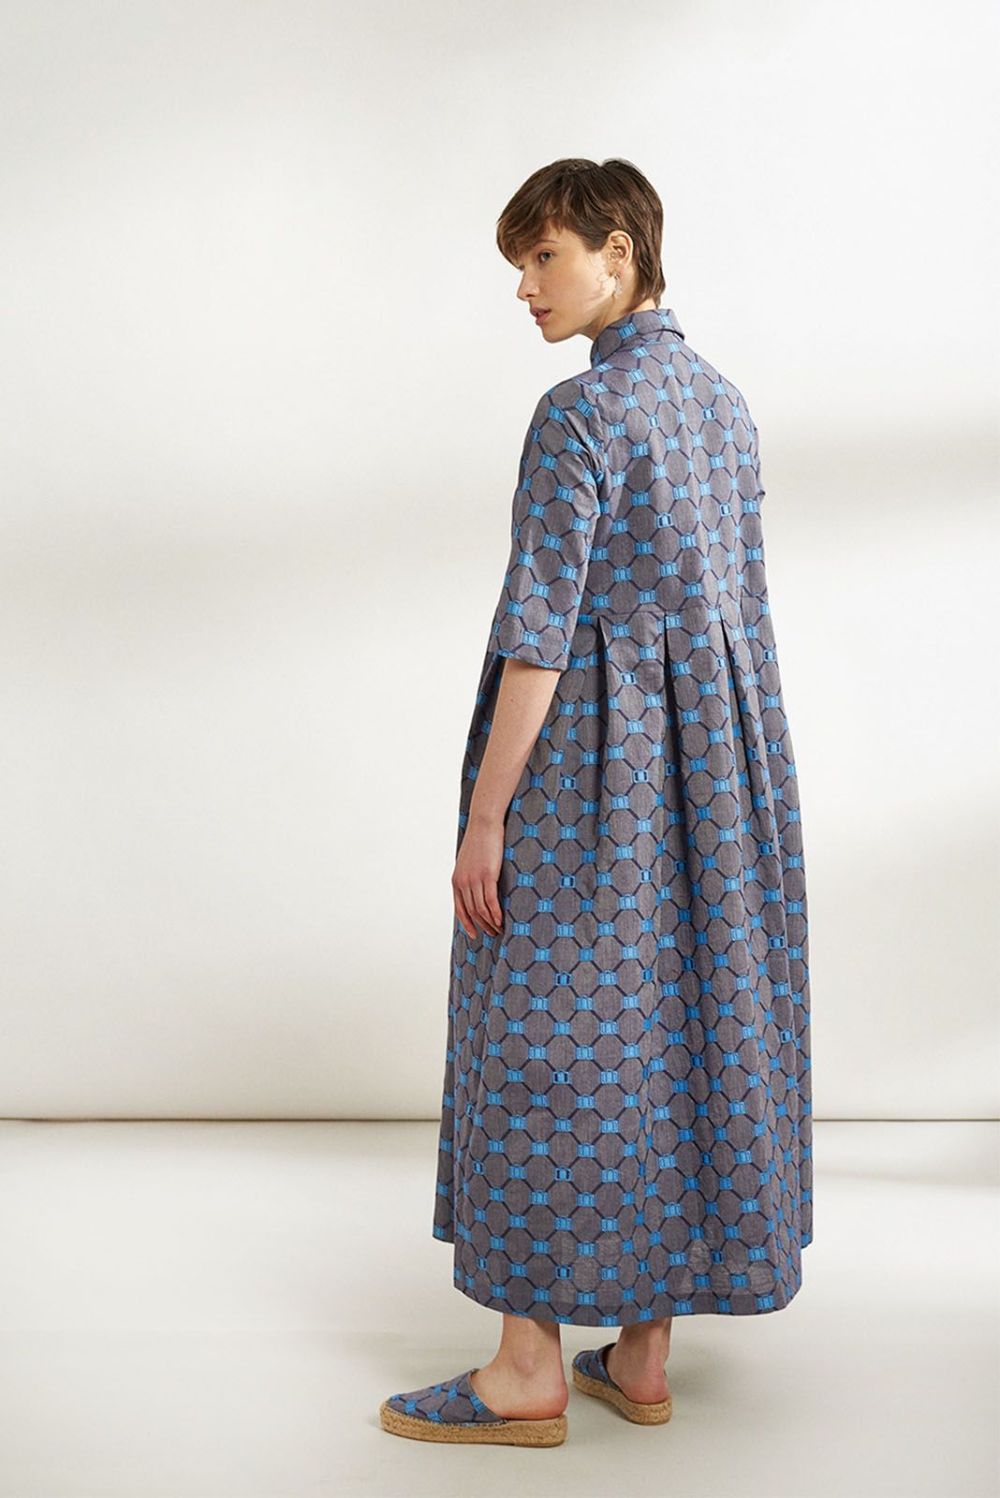 zoumboulia pleated dress made of woven on the loom cotton